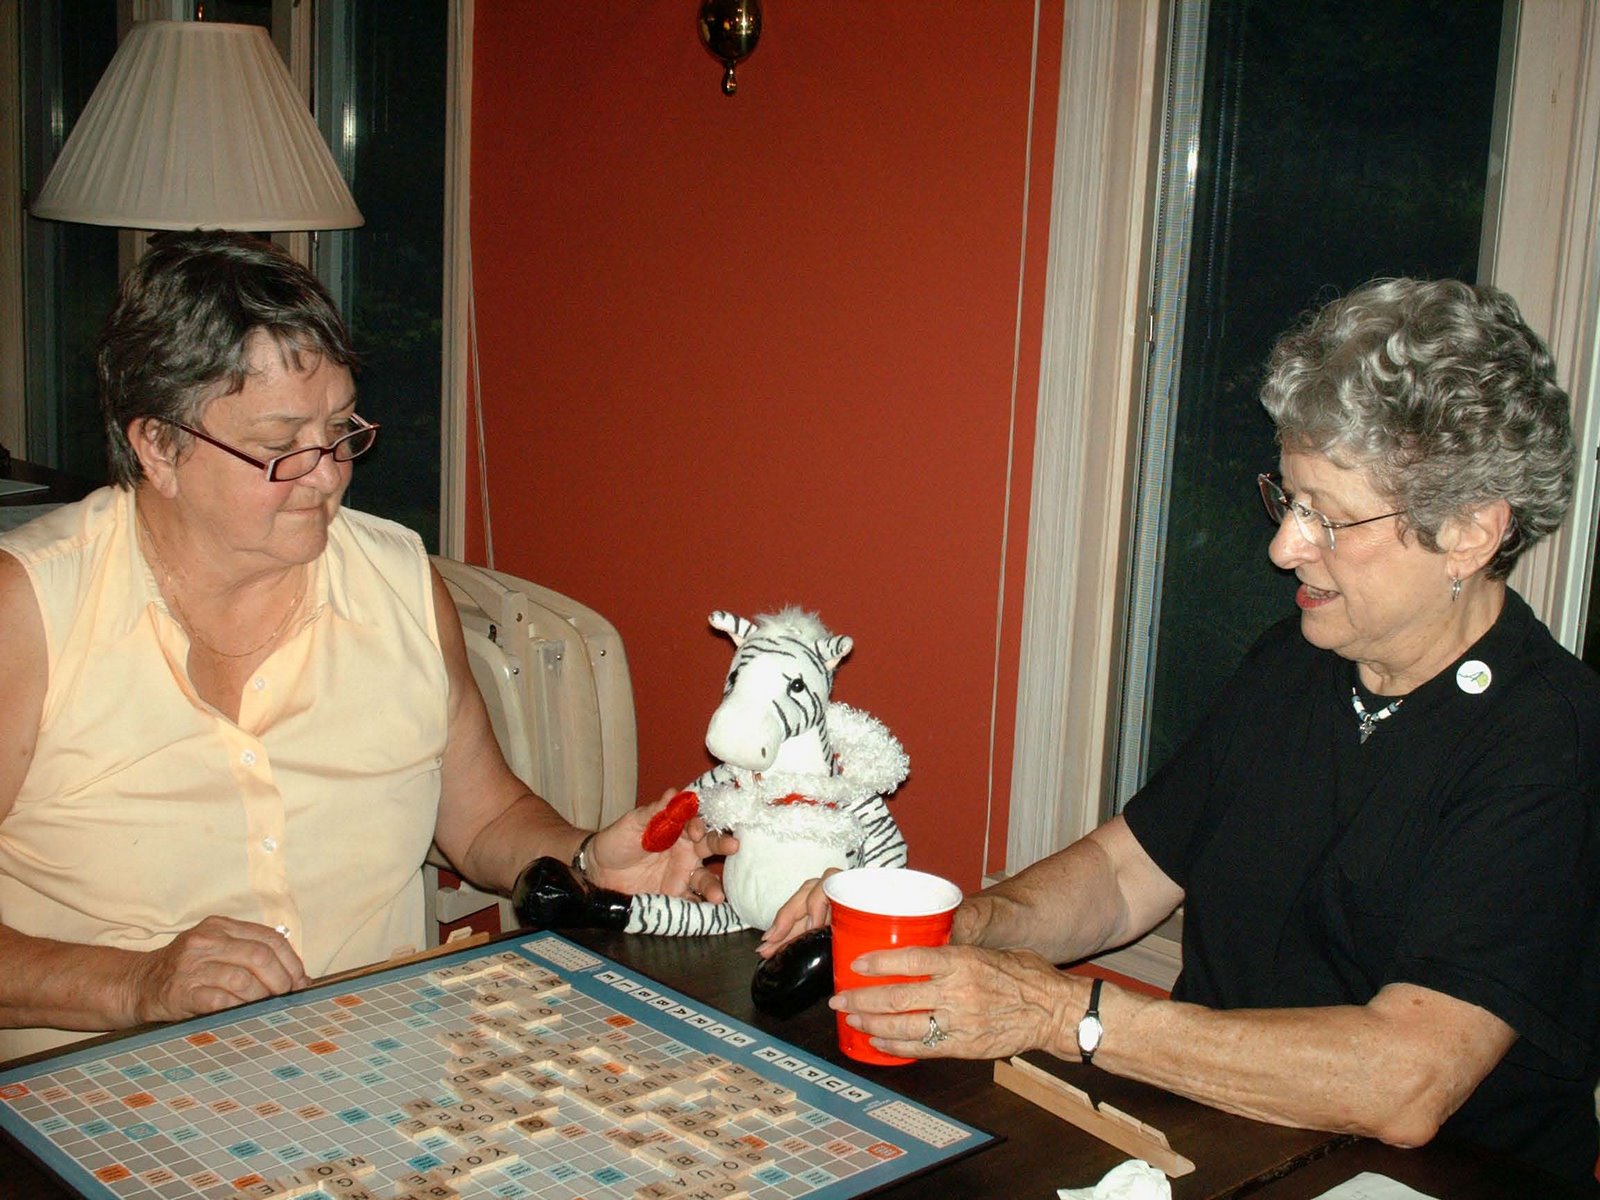 [Zippy+beats+Jimmie+and+Donette+at+Scrabble.-1.jpg]